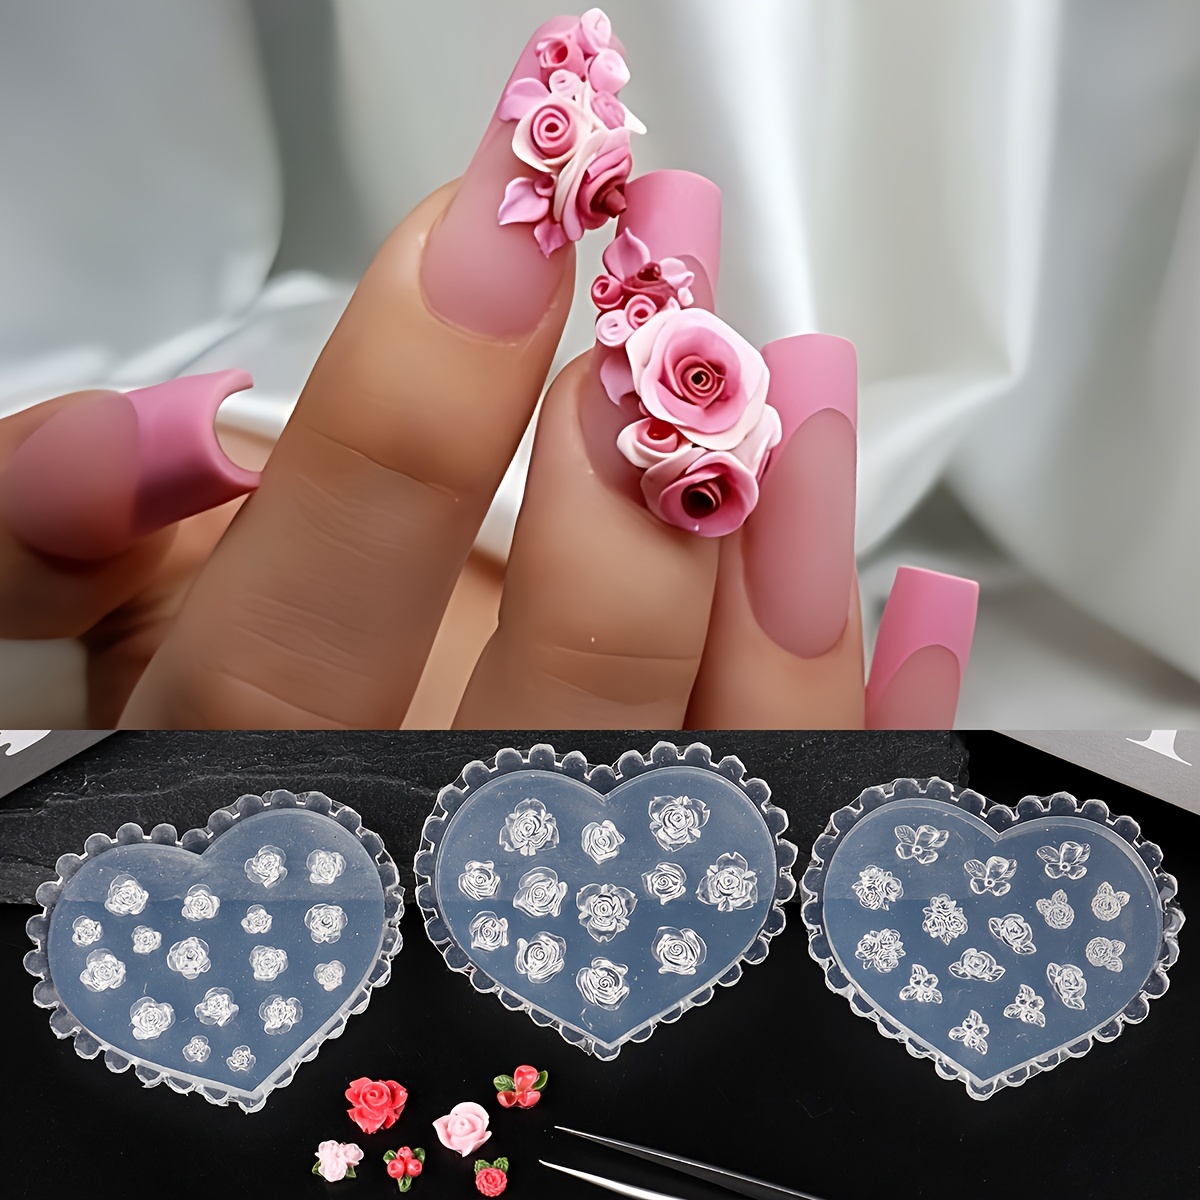 

3d Rose Flower Leaf Design Mould Nail Art Stencil Silicone Carving Mold, Romantic Template Diy Mini Nail Molds Manicure Art Tool